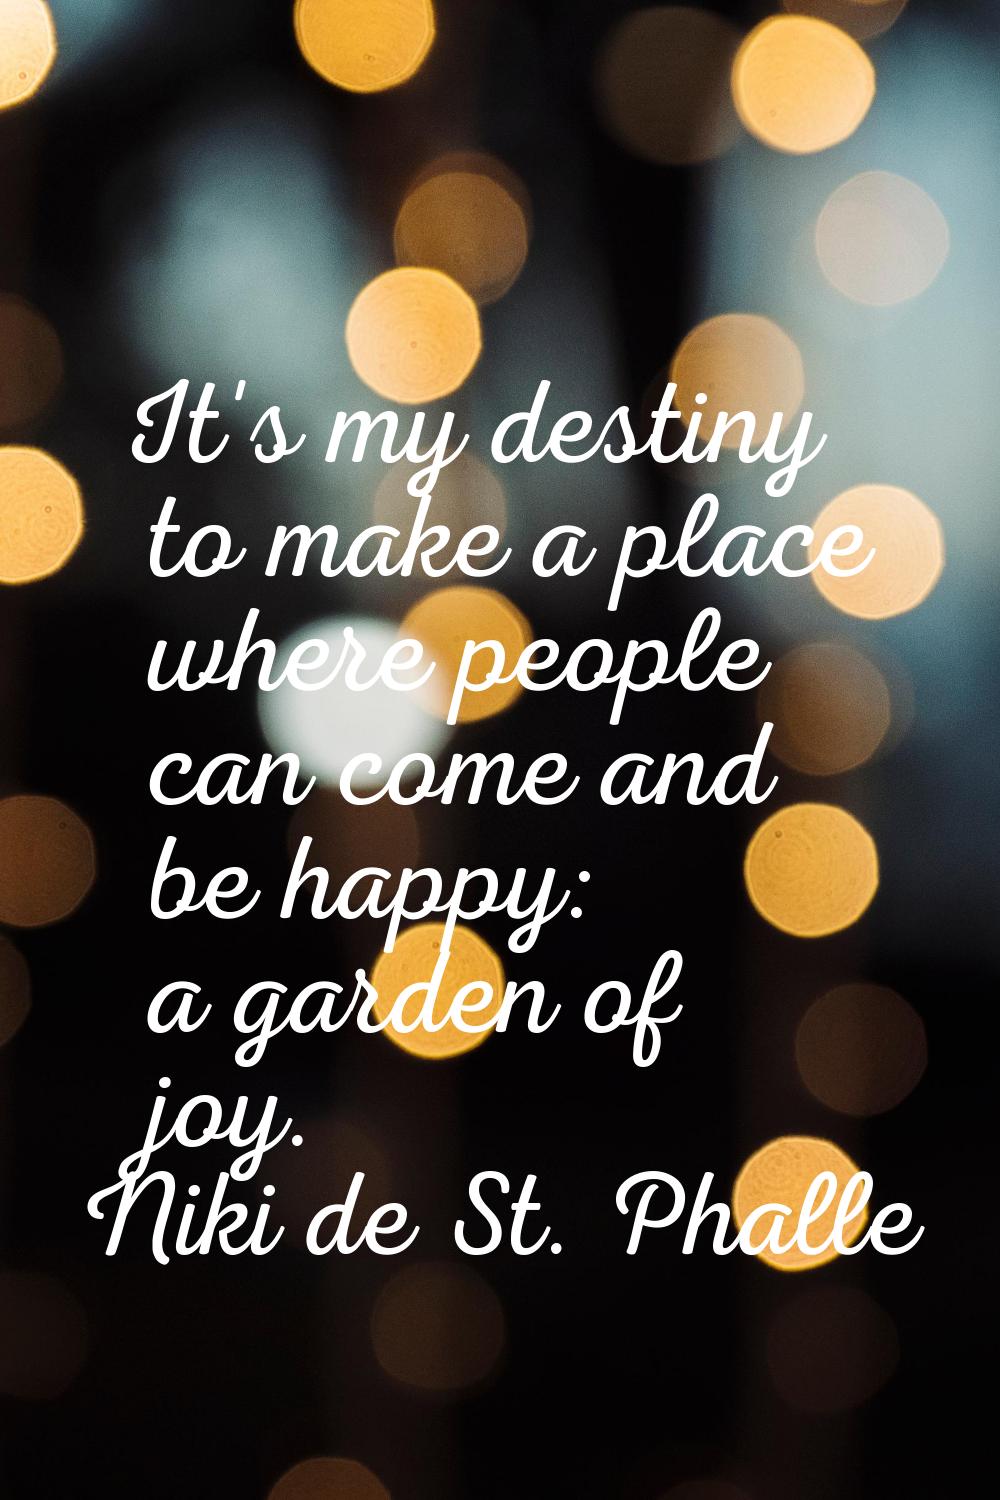 It's my destiny to make a place where people can come and be happy: a garden of joy.